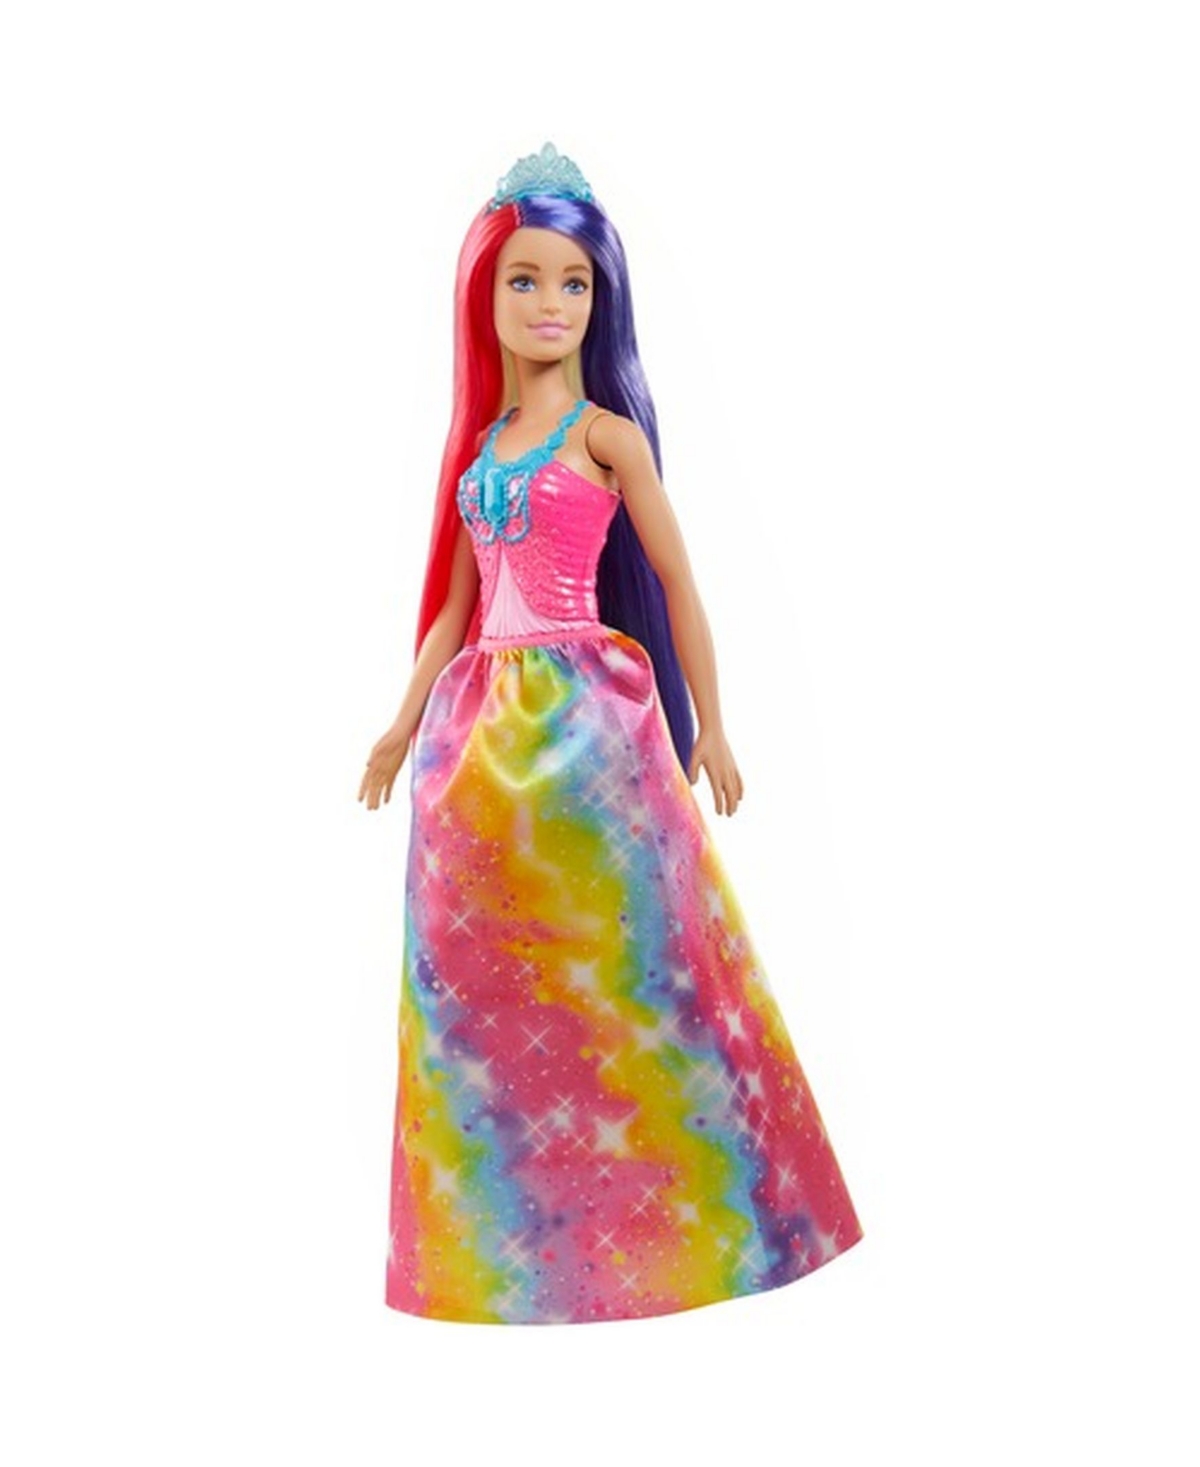 Barbie Dreamtopia Royal Doll With Extra-long Fantasy Hair, Headband & Styling Accessories In Multi